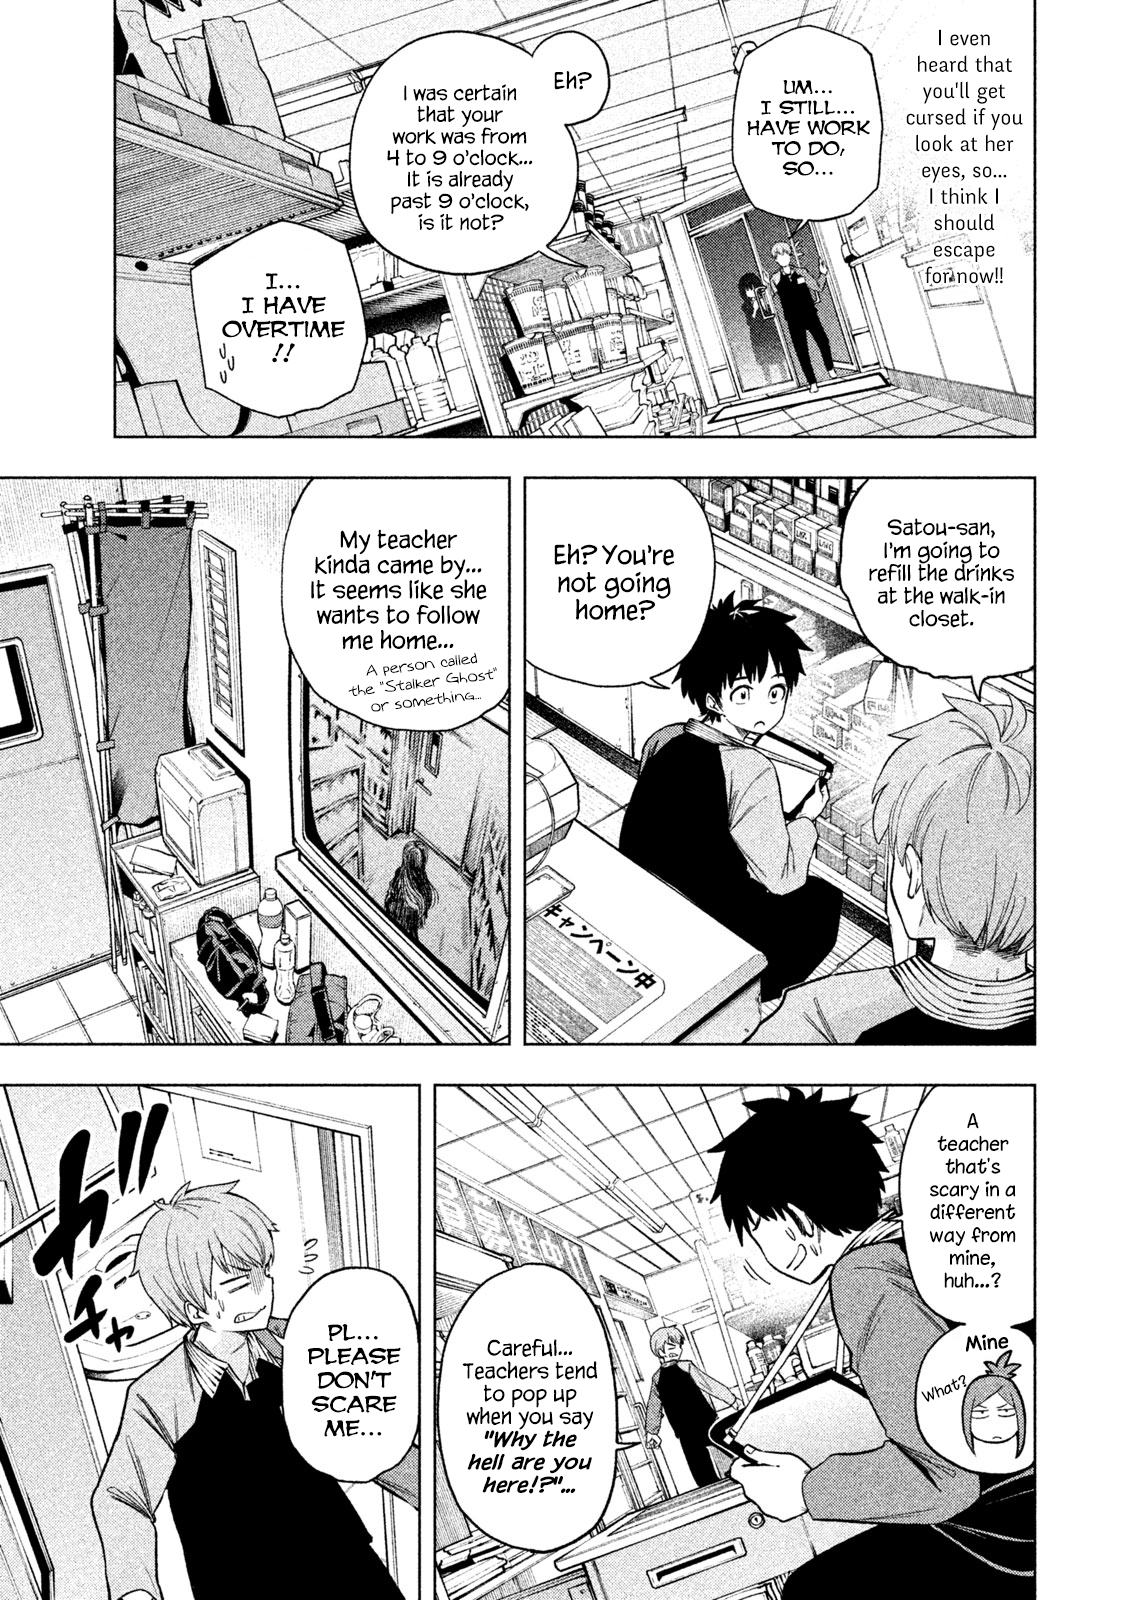 Why are you here Sensei!? Vol.6 Chapter 51: Out of the Depths of Gloomy Attire